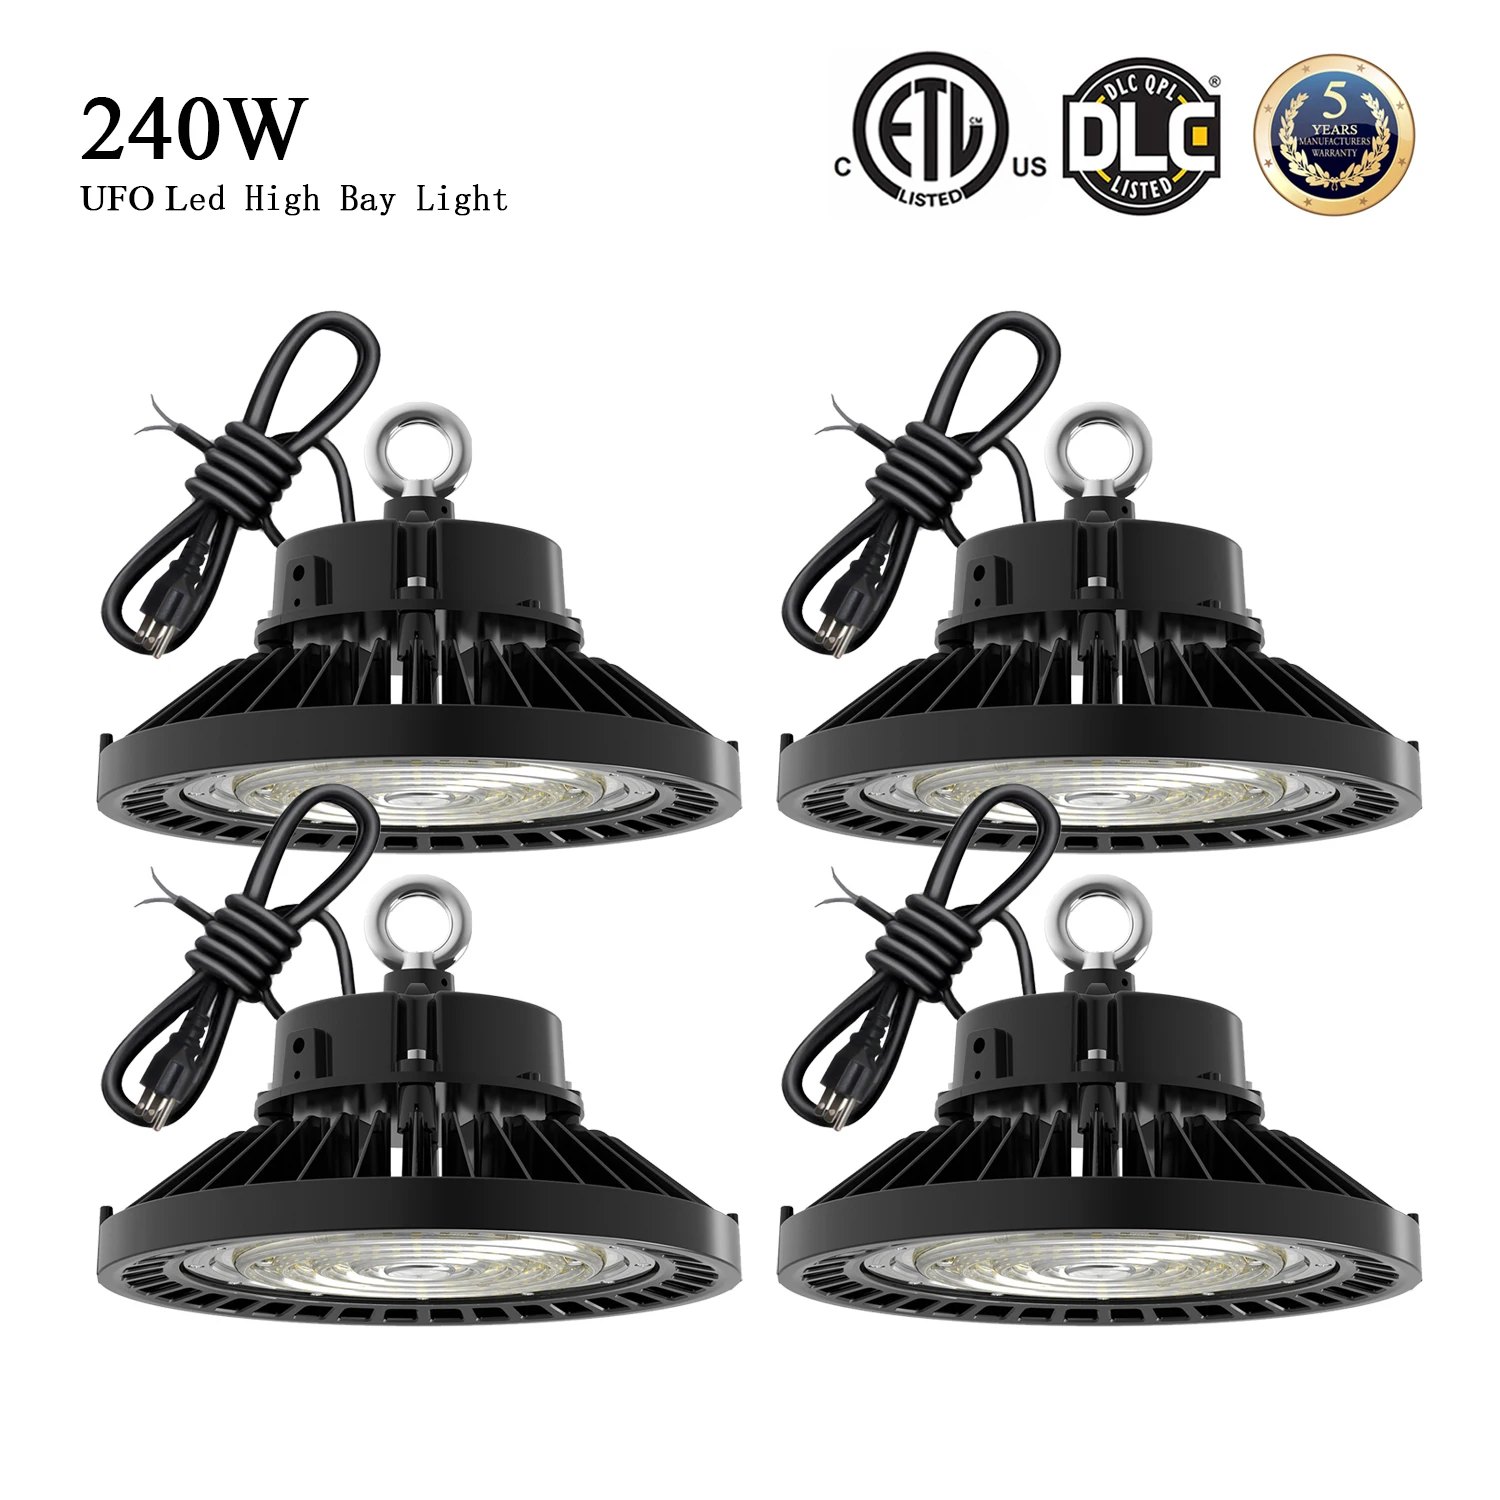 4 Pieces 240W UFO High Bay Light 1-10V Dimmable Commercial Industrial Lighting Fixture 5000K Warehouse Workshop Lamp 36000lm